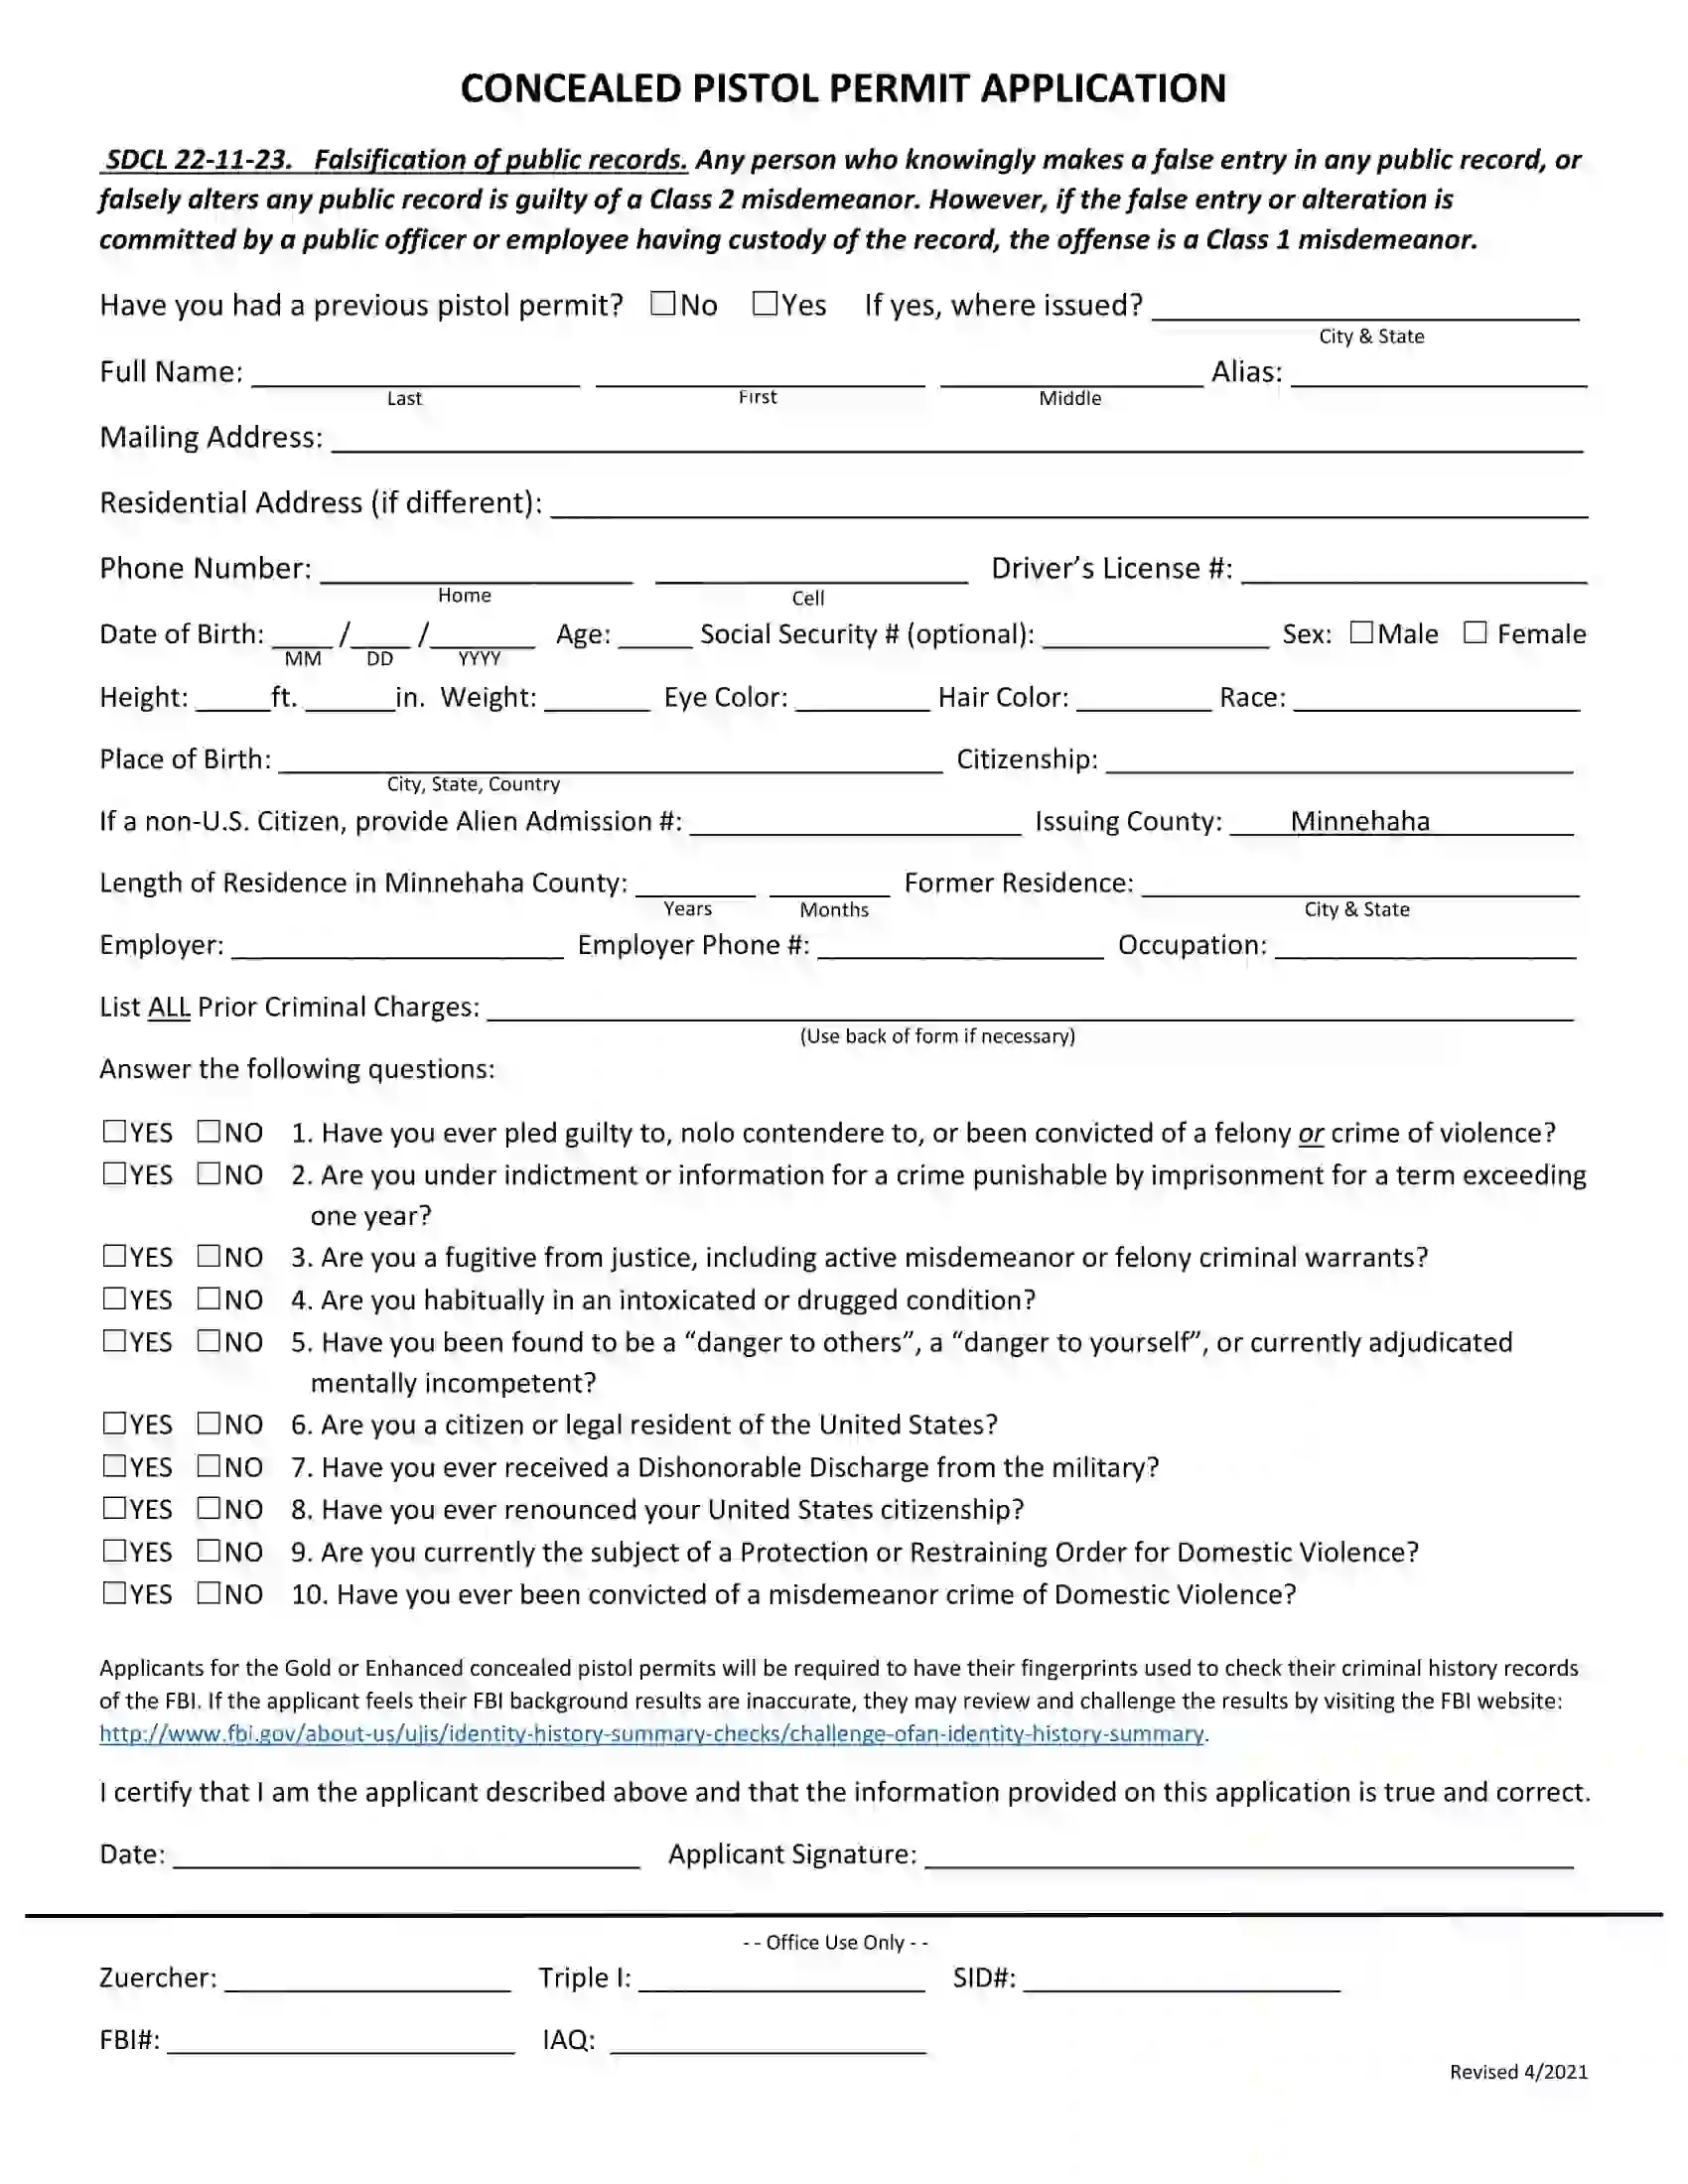 Concealed Pistol Permit Application